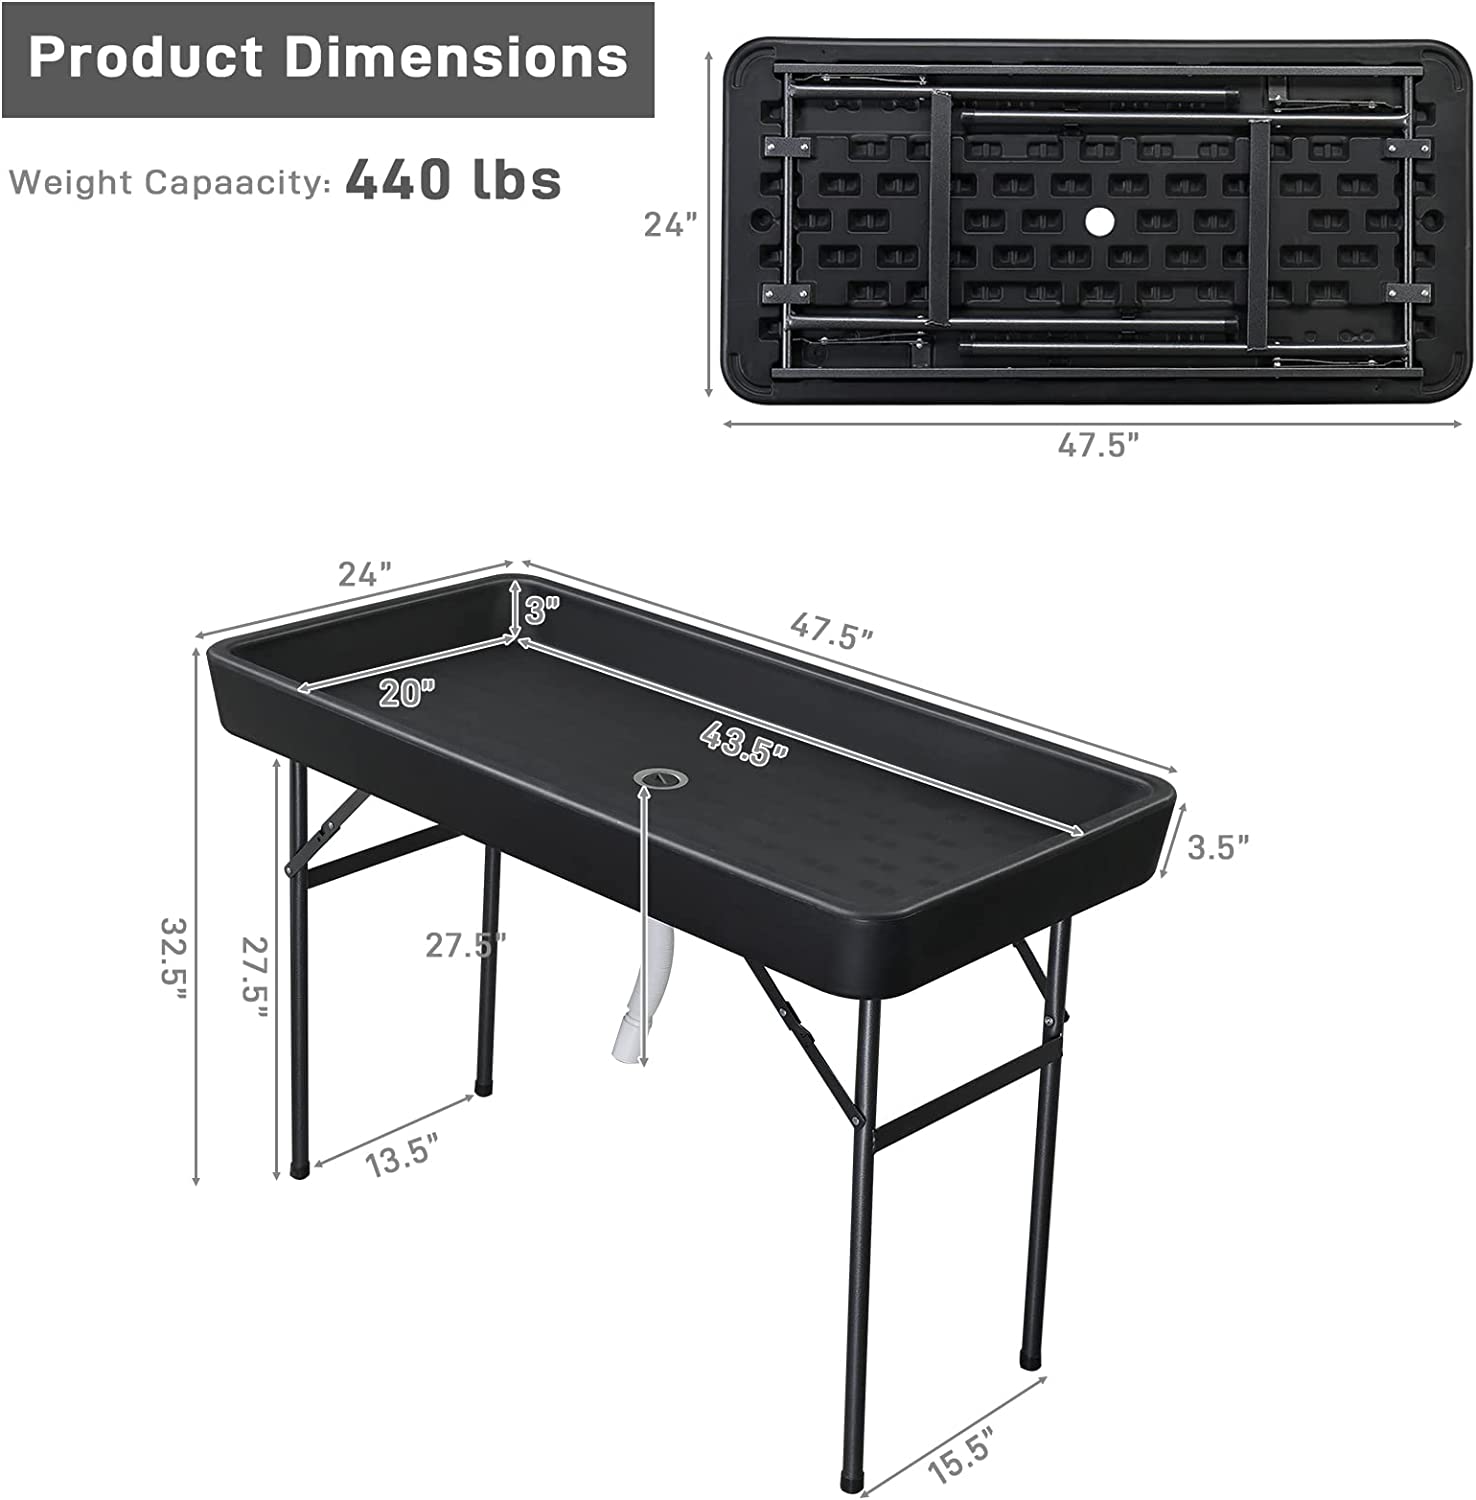 VINGLI 4 Foot Party Ice Cooler Folding Table， Portable Tailgate Camp Fishing Cleaning Table， Plastic with Matching Skirt， Ice Table for Party， BBQ， Camping，Picnic (Black)